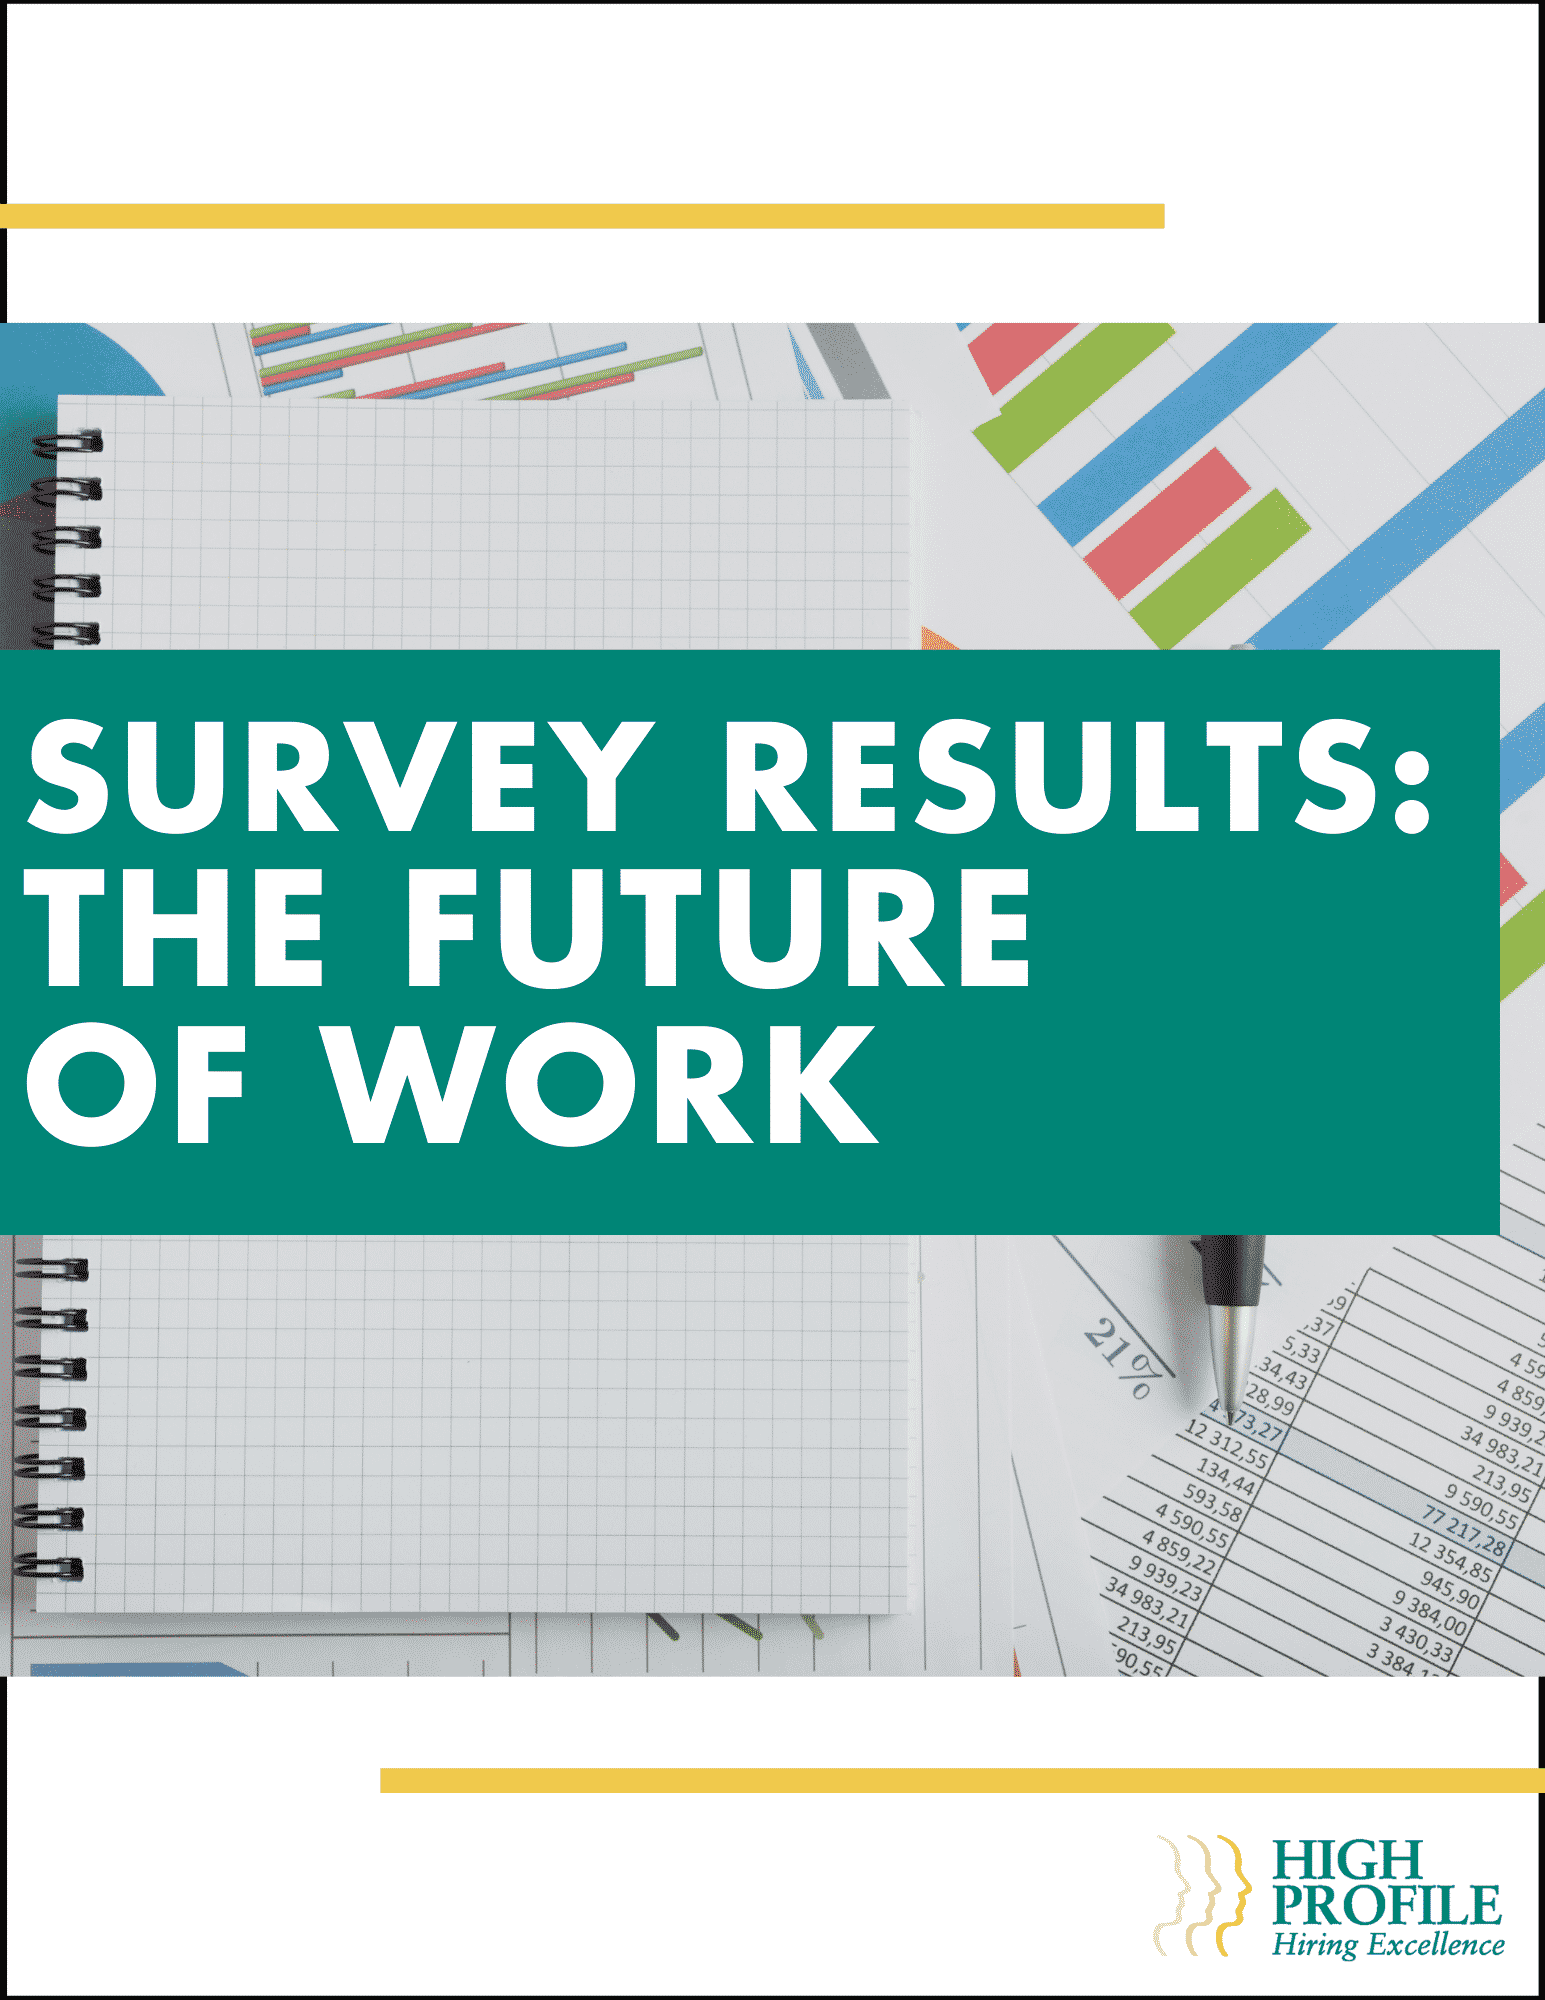 The Future of Work Survey Results | High Profile